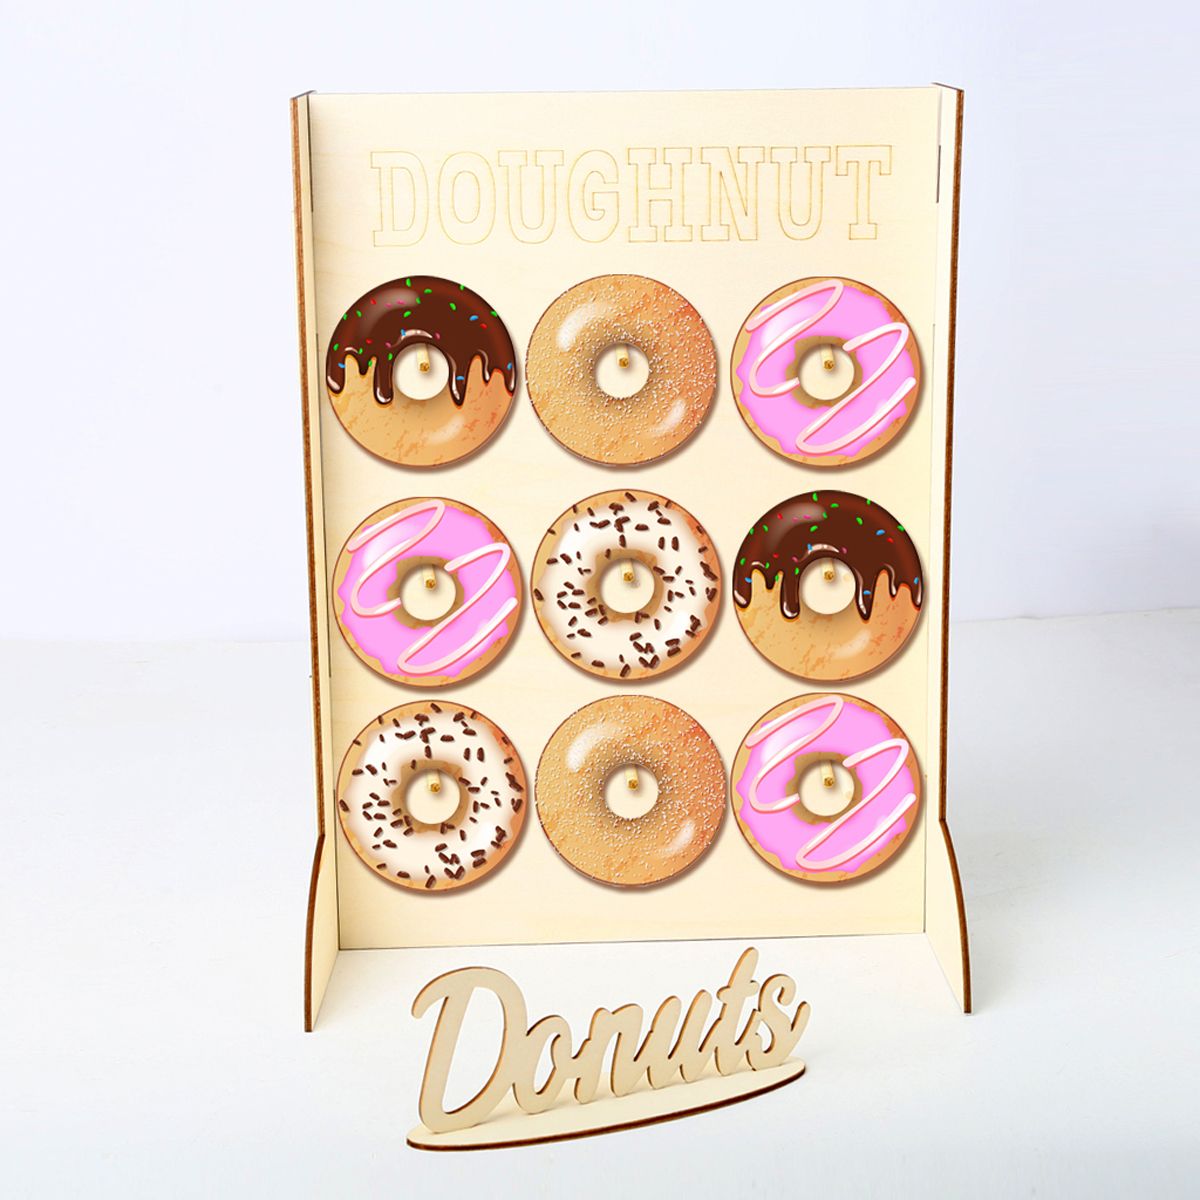 Wooden-9-Donut-Wall-Candy-Stand-Table-Holder-Home-Decor-Wedding-Party-Supplies-Decorations-1638369